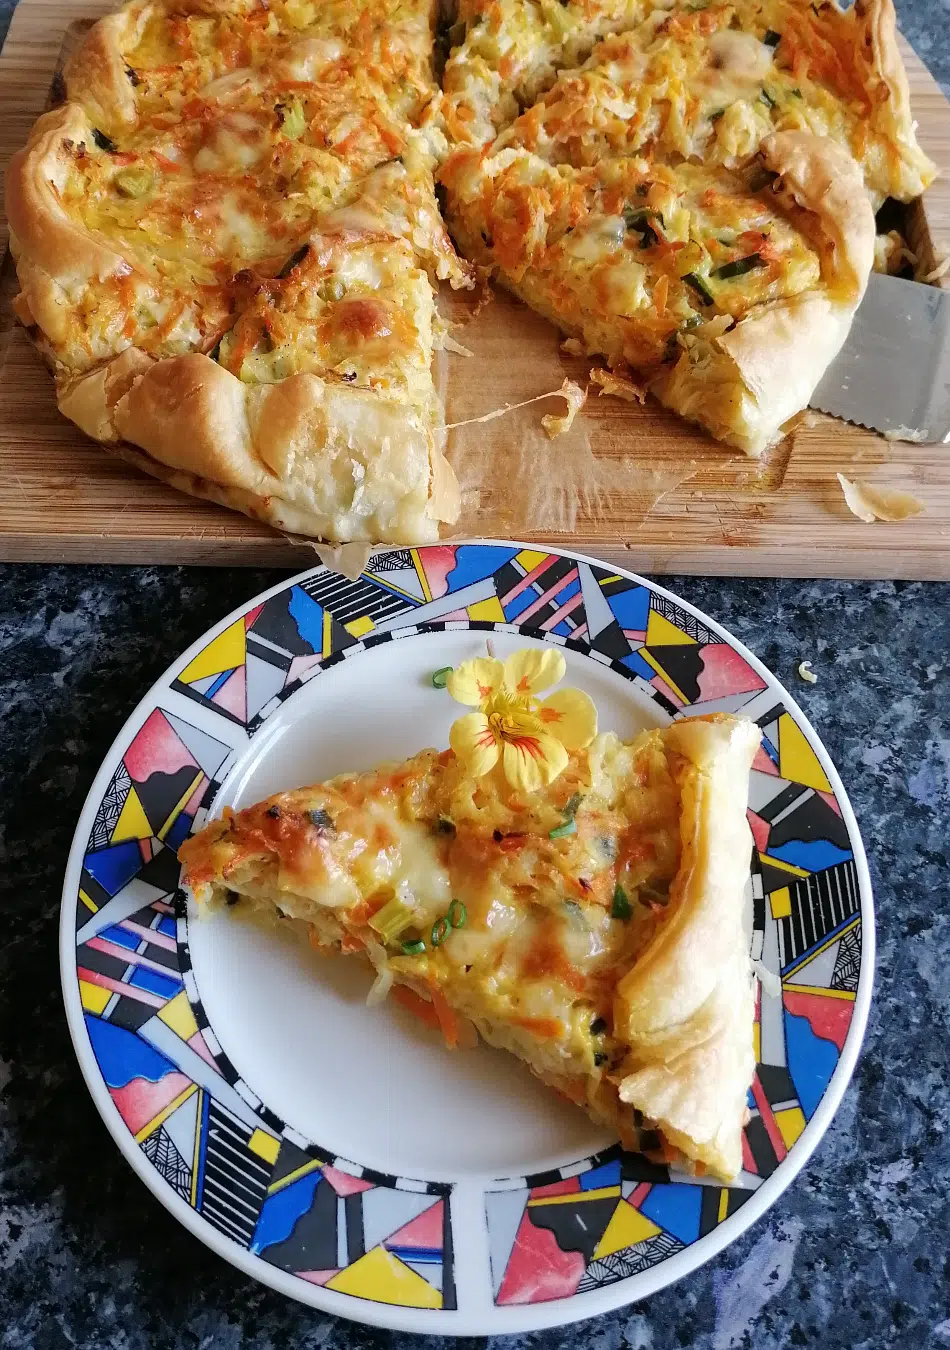 Freshly baked carrot kohlrabi quiche with puff pastry.